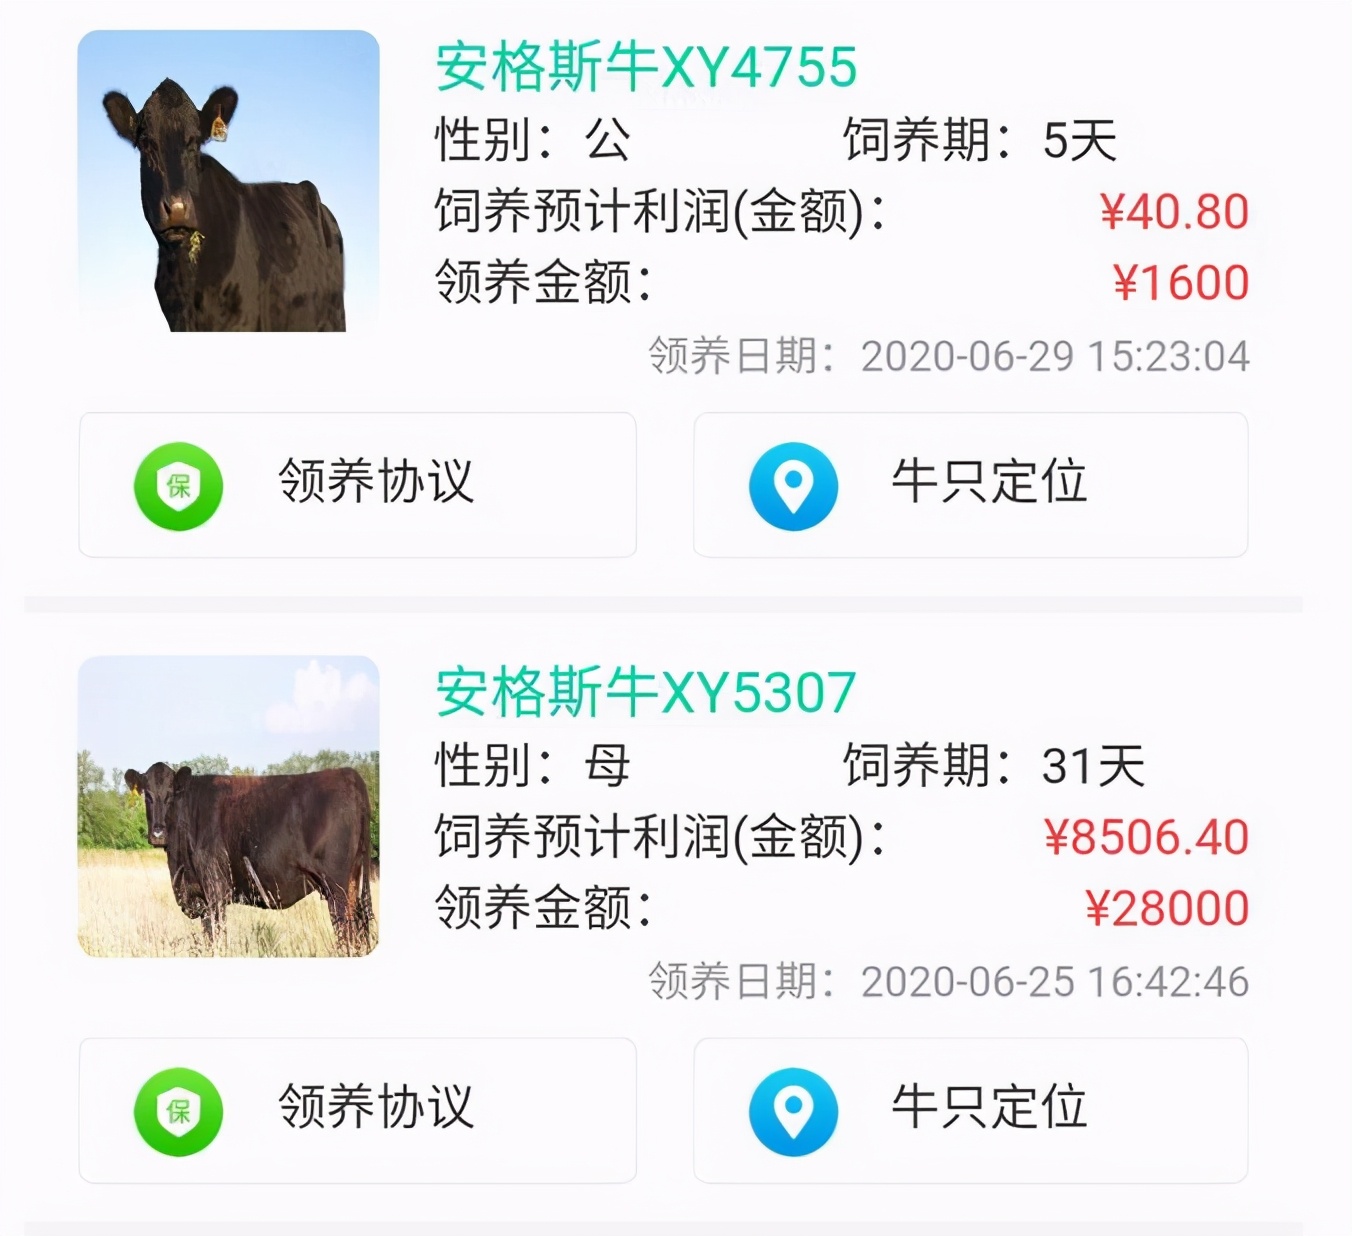 The heat that raise a cattle is ecbolic give a kind of new-style fraud that raise a cattle, many people by " Yun Yangniu " cheated hundred thousands of